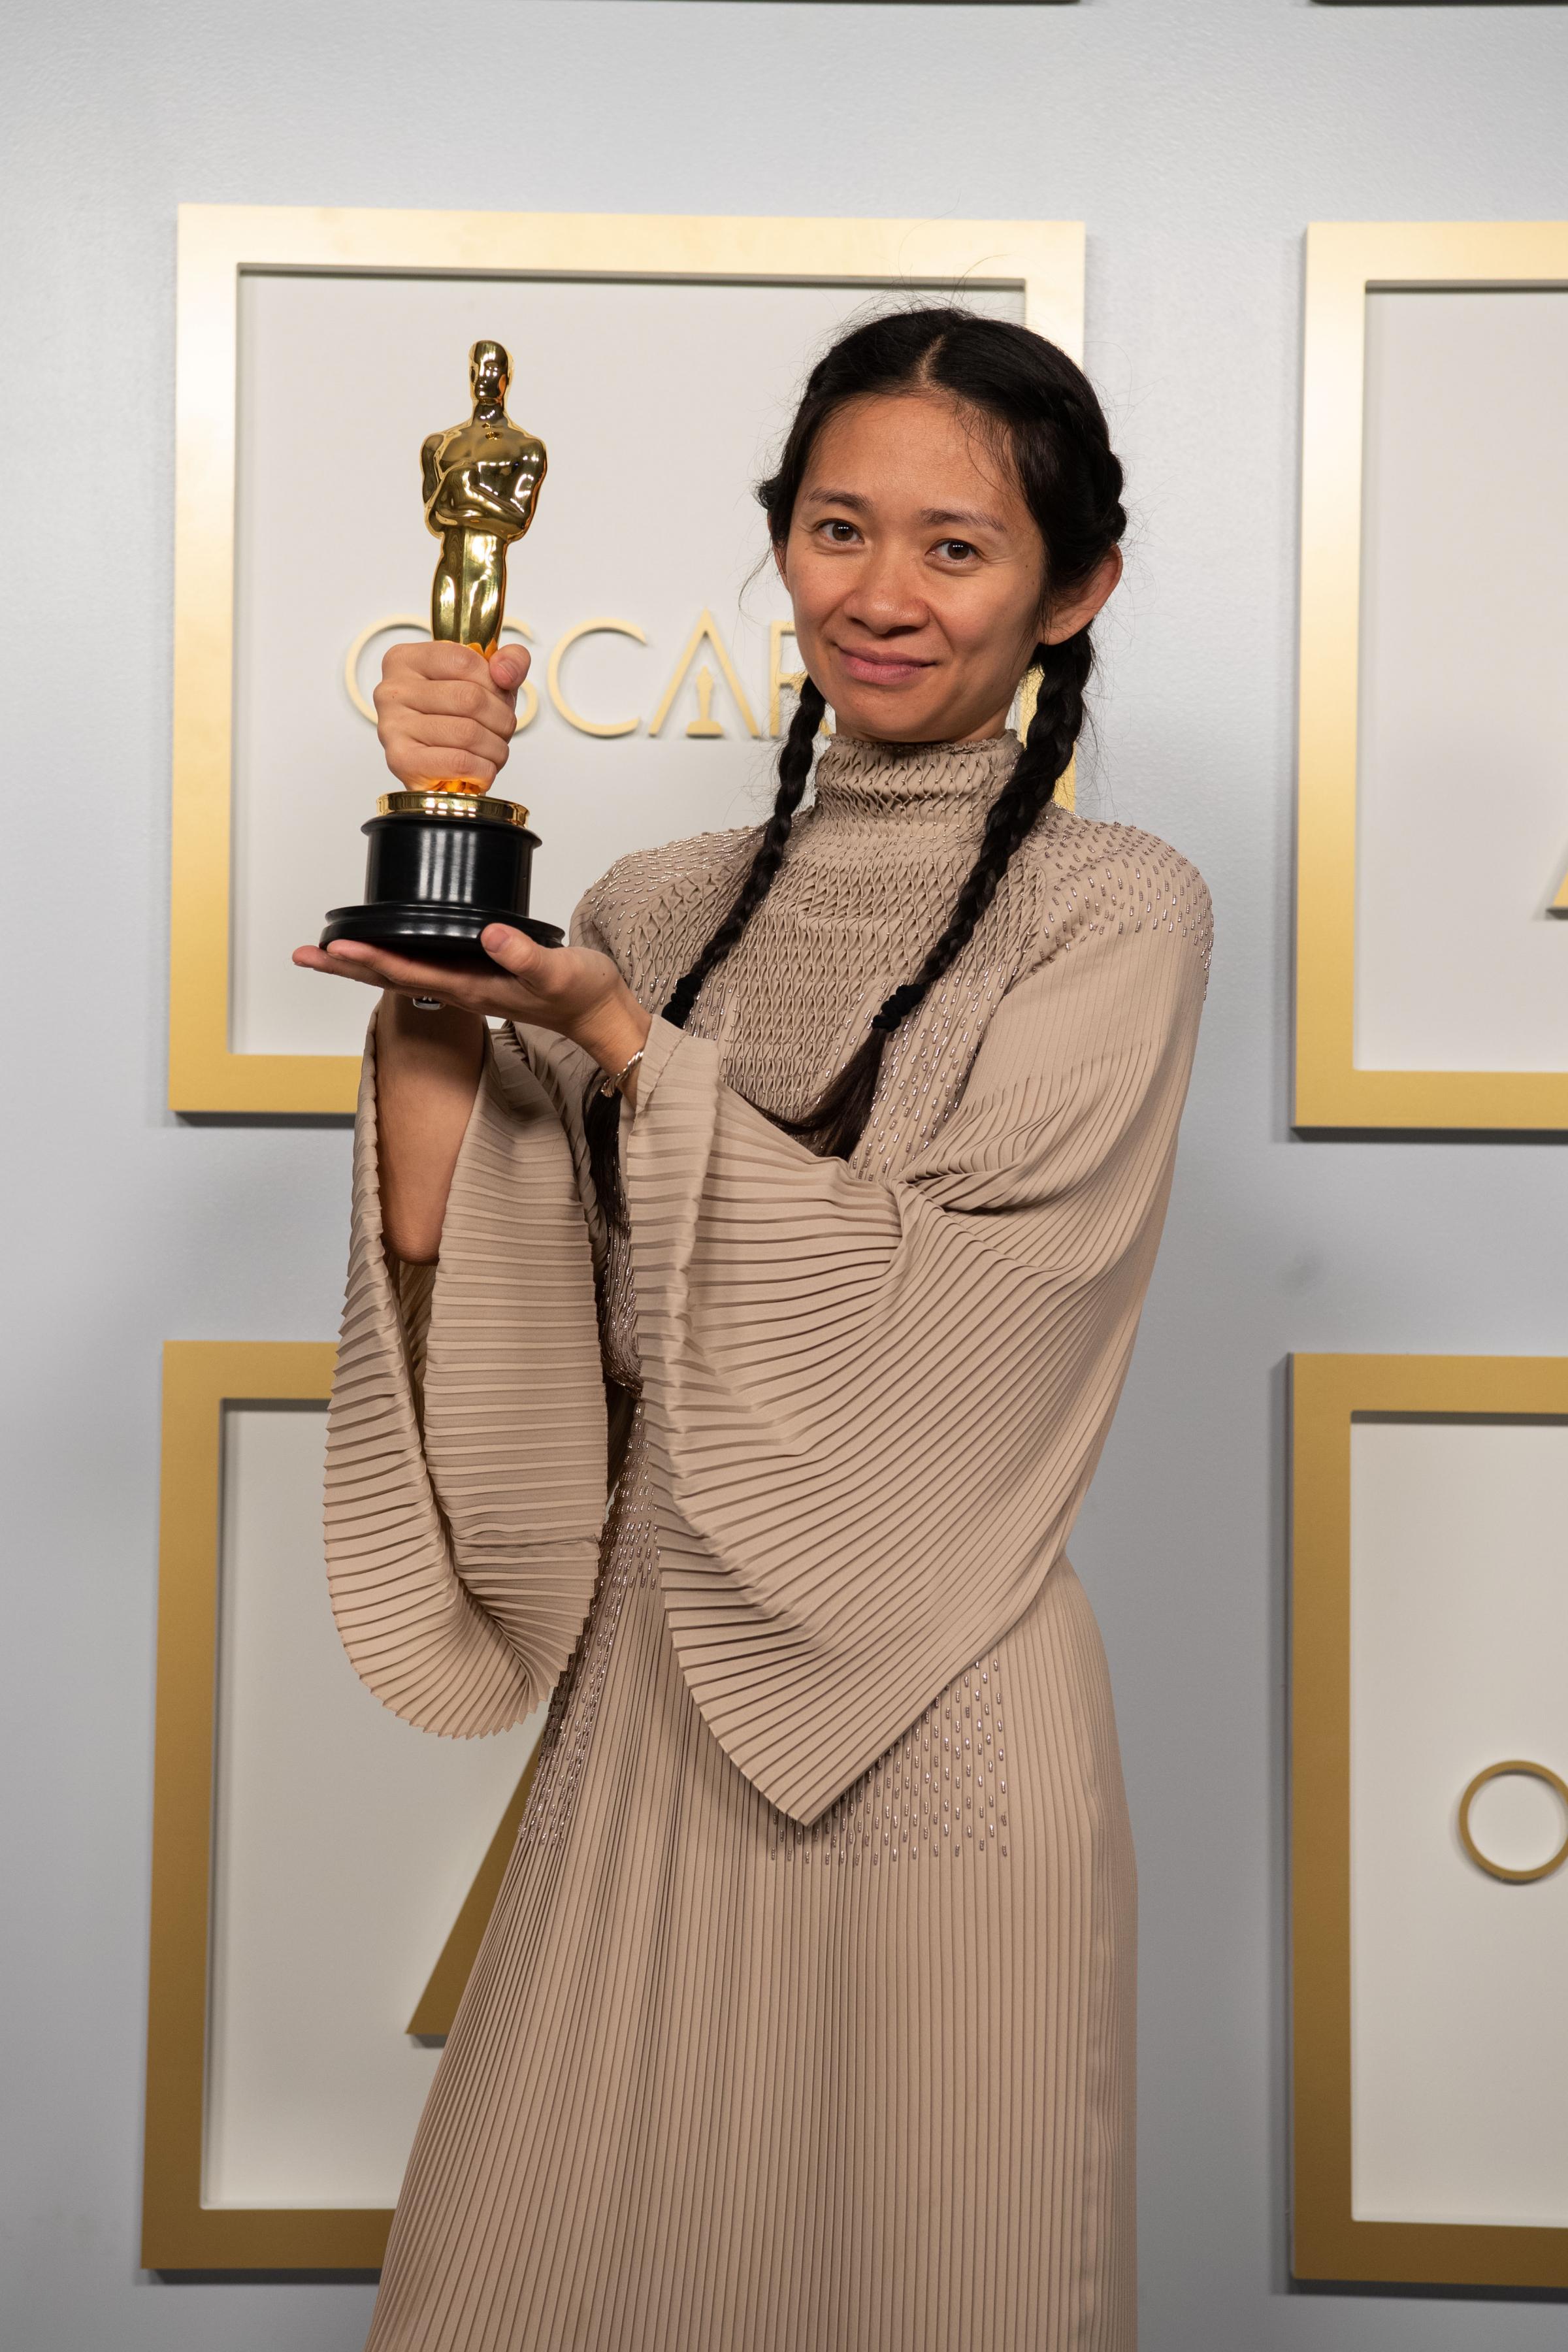 Chloe Zhao posing backstage with the Oscar for Directing, for the film Nomadland, at the 93rd Academy Awards ceremony held at Union Station in Los Angeles, California